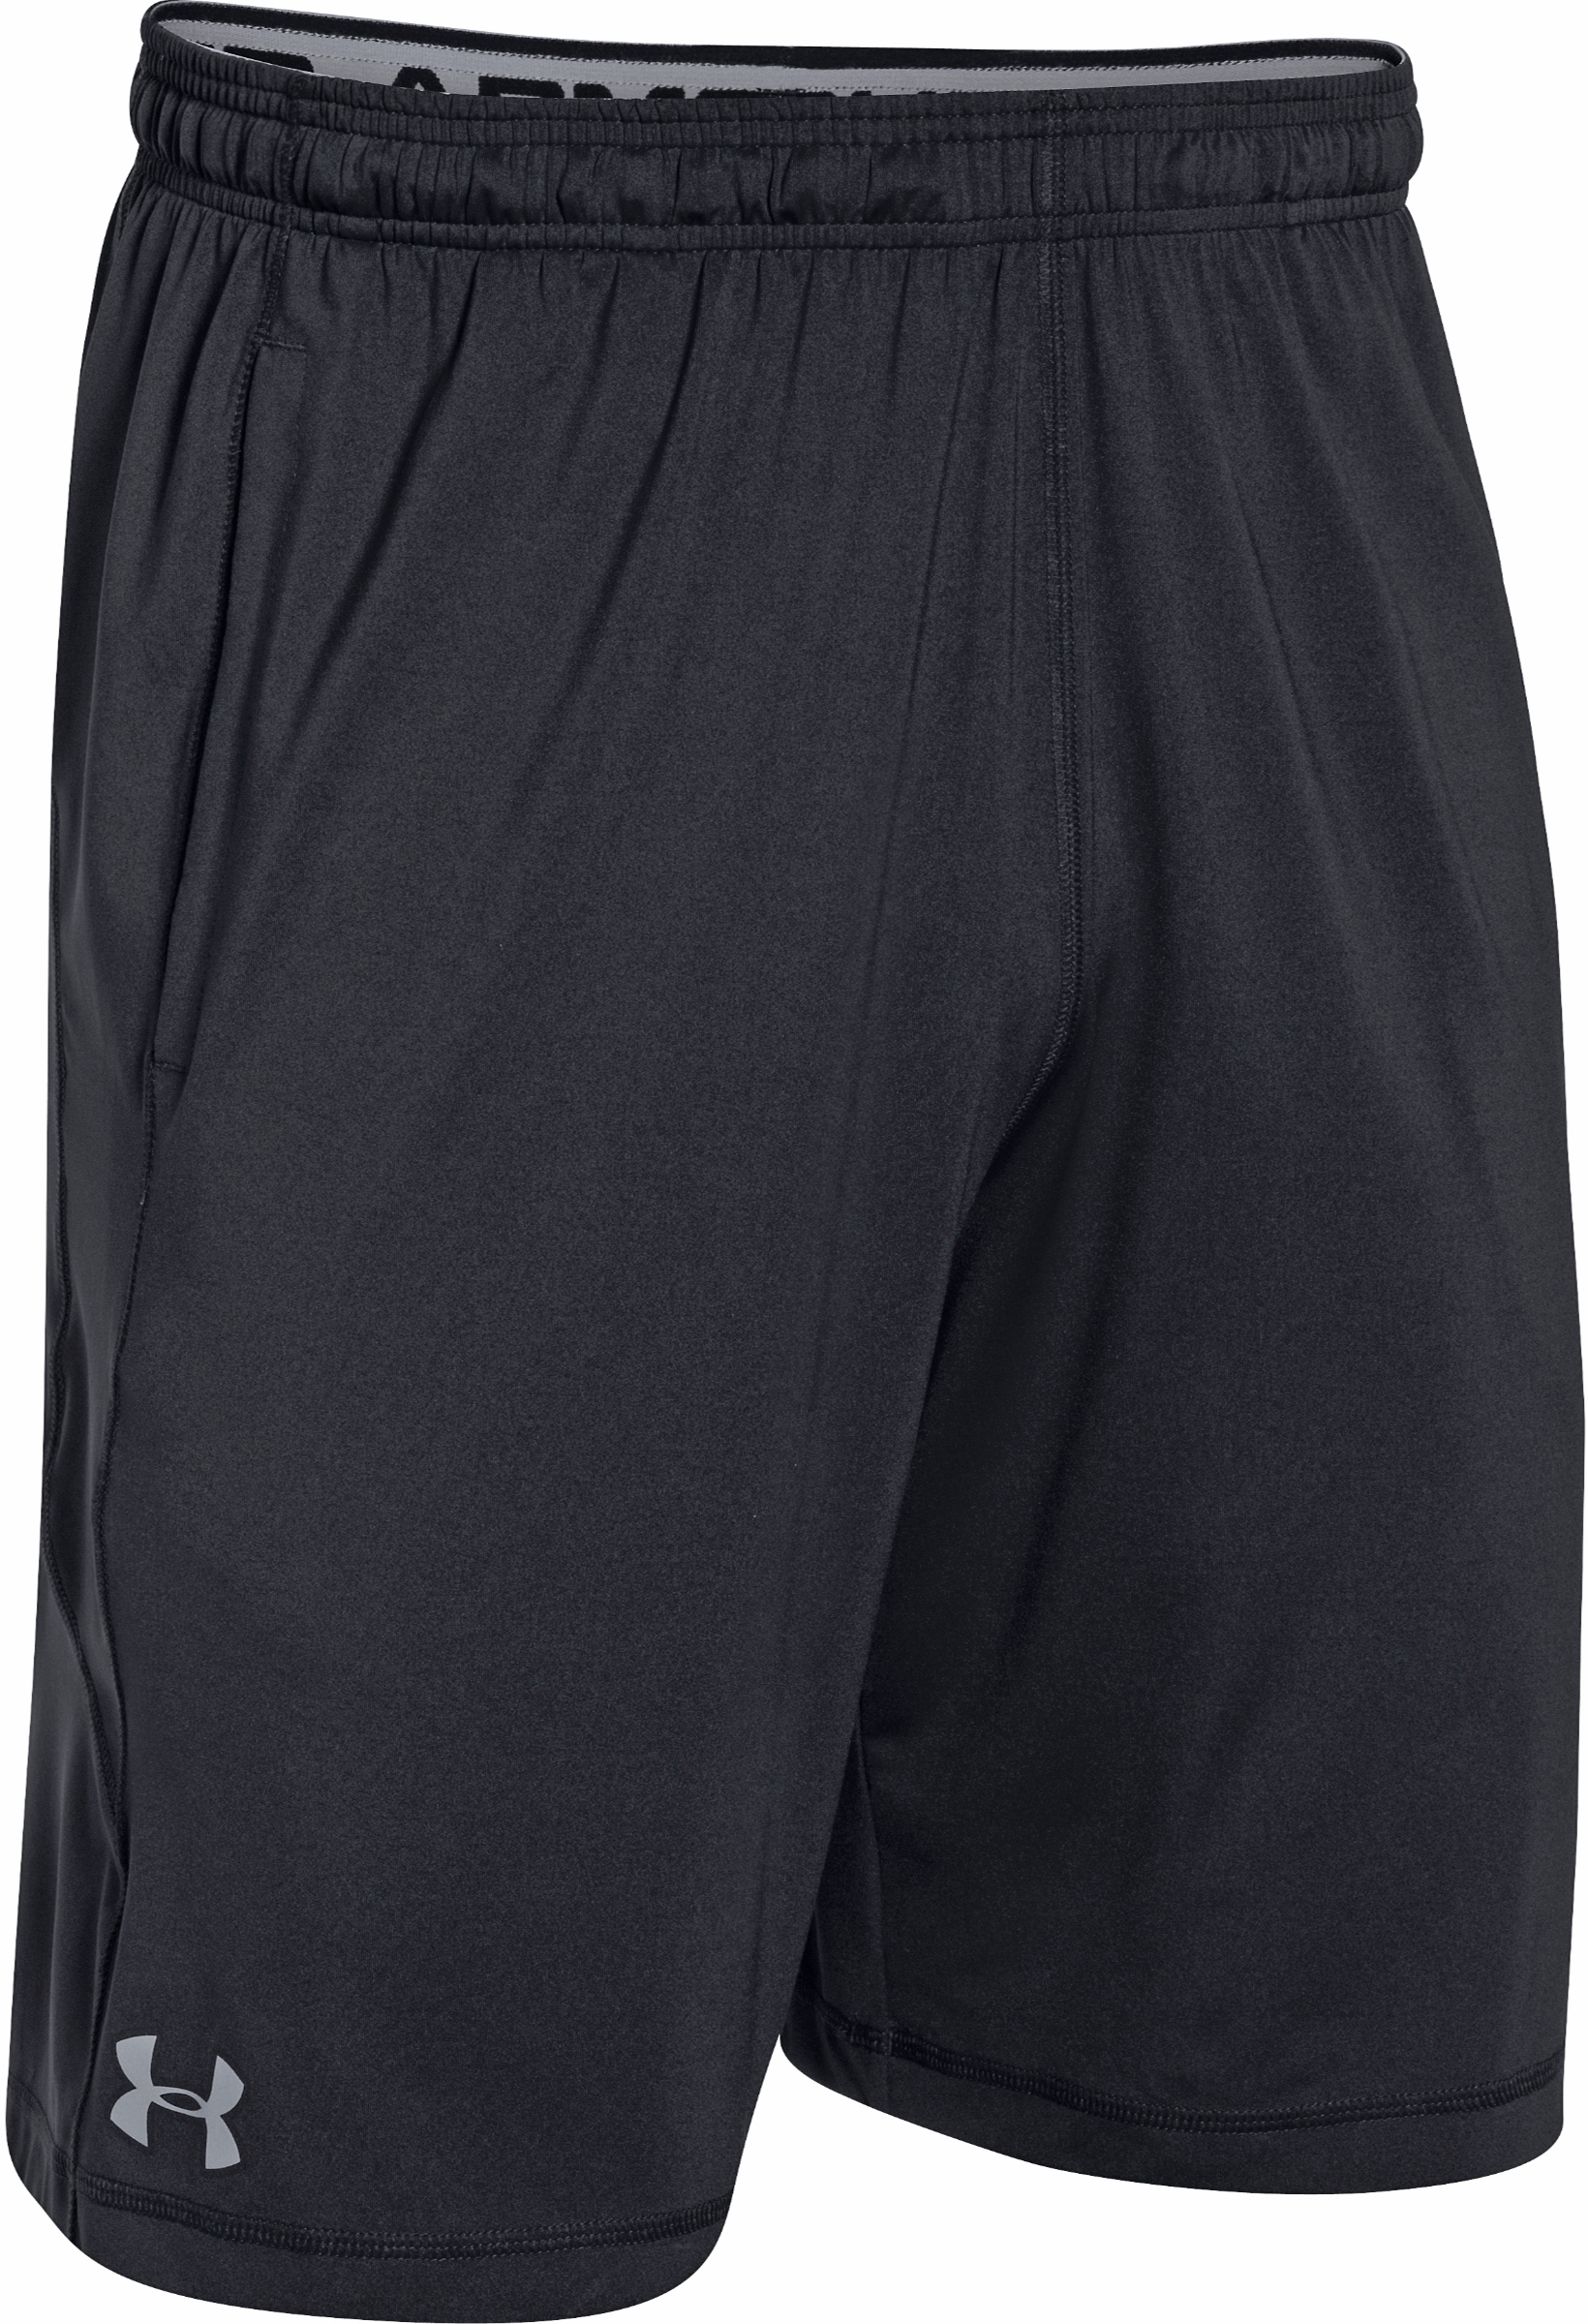 E102601 Under Armour Adult Small (Black/Graphite) Pocketed Loose Fit 10 ...